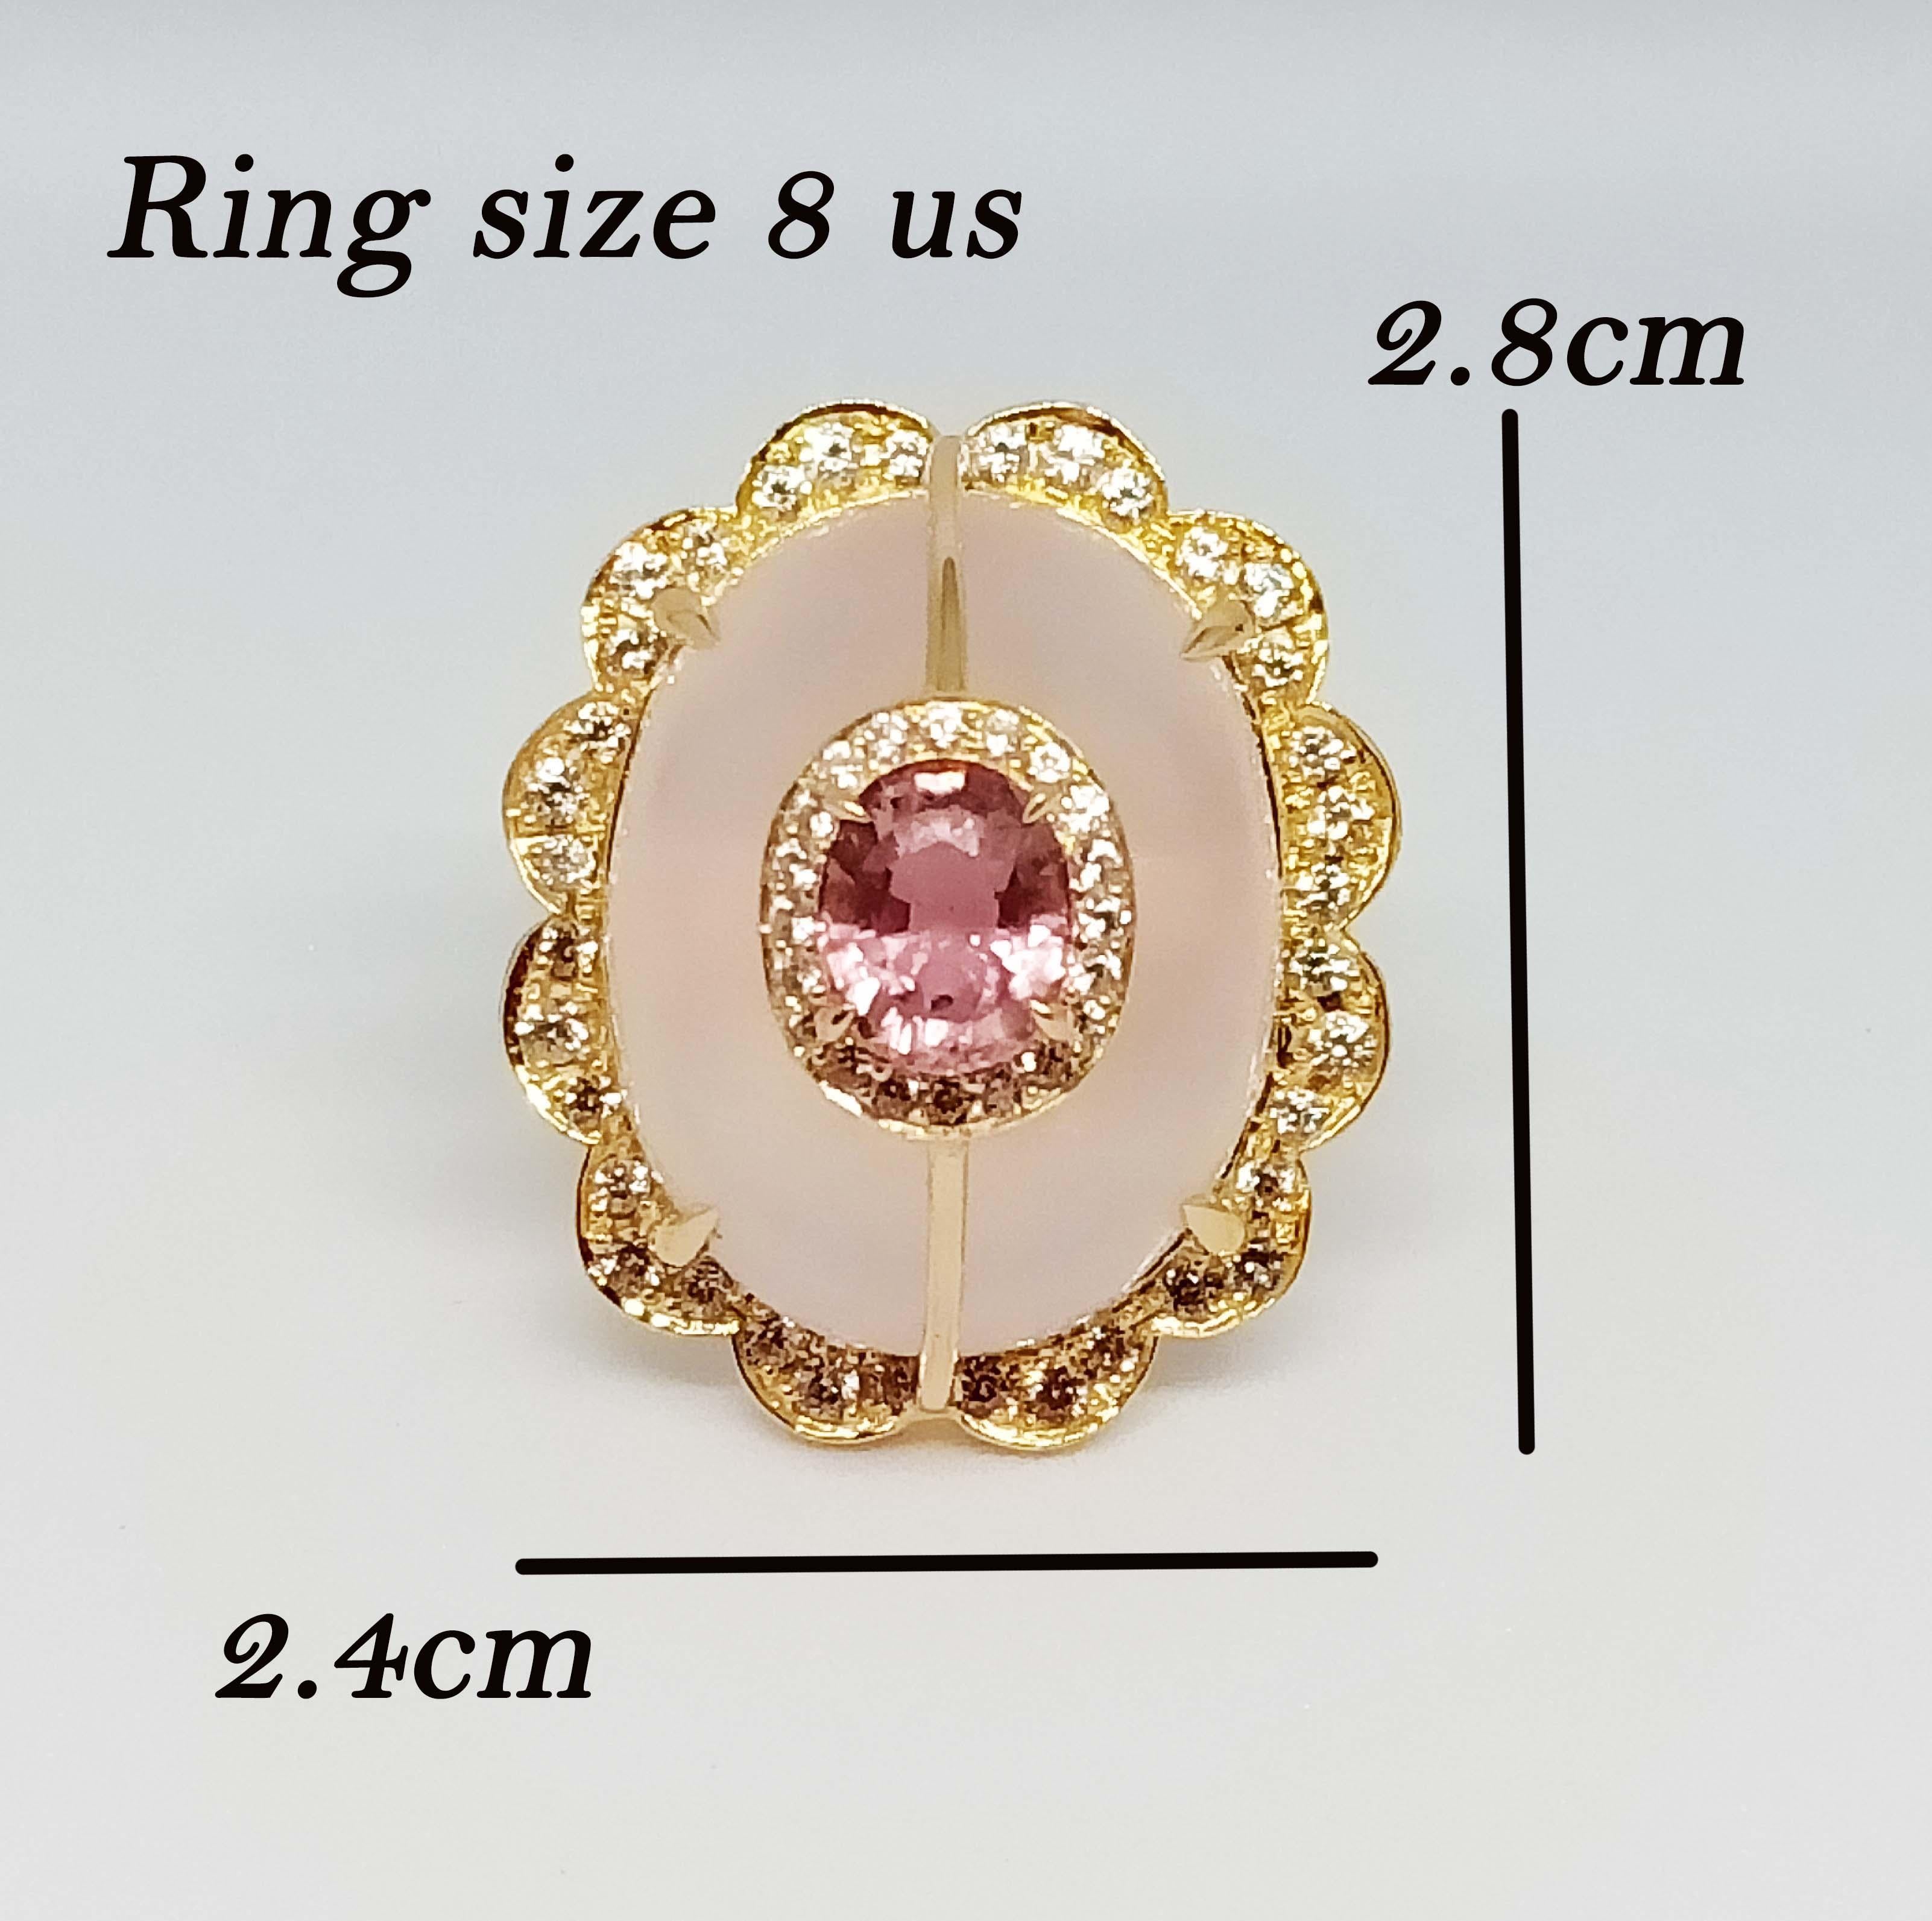 Rose Quartz  Cabochon  Oval 23x18x H12.5 mm. 33.43 cts.
Pink tourmaline Oval 7.7x6.3 mm. 1.83cts.
White Zircon 1.8 mm. 12 pcs. 
White Zircon 1.5 mm. 24 pcs.
White Zircon 1.25 mm. 18 pcs.

Sterling Silver on 18K Gold Plated.

Ring : Size 8 us.
